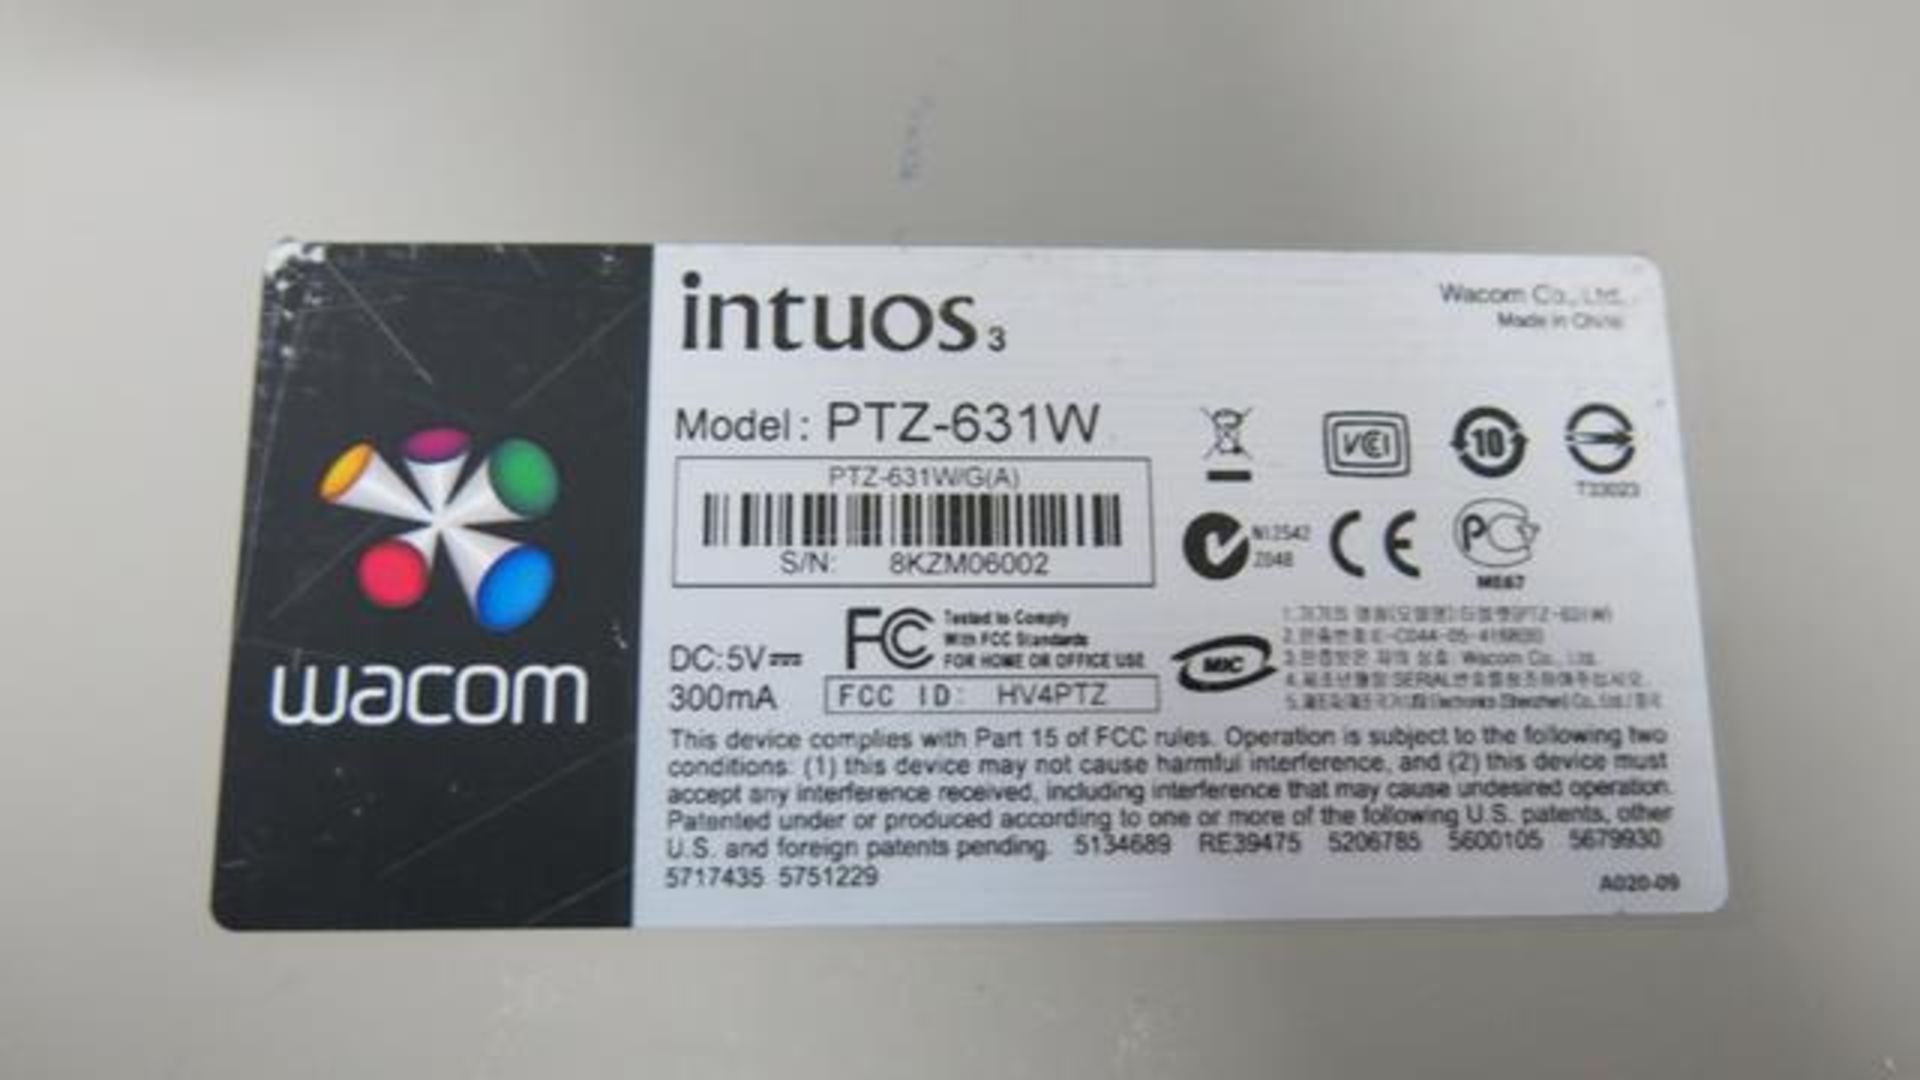 WACOM, PTZ-631W, INTUOS, WIDESCREEN, GRAPHICS DRAWING TABLET (UNIT NOT FUNCTIONING) (TAG#290) - Image 2 of 2